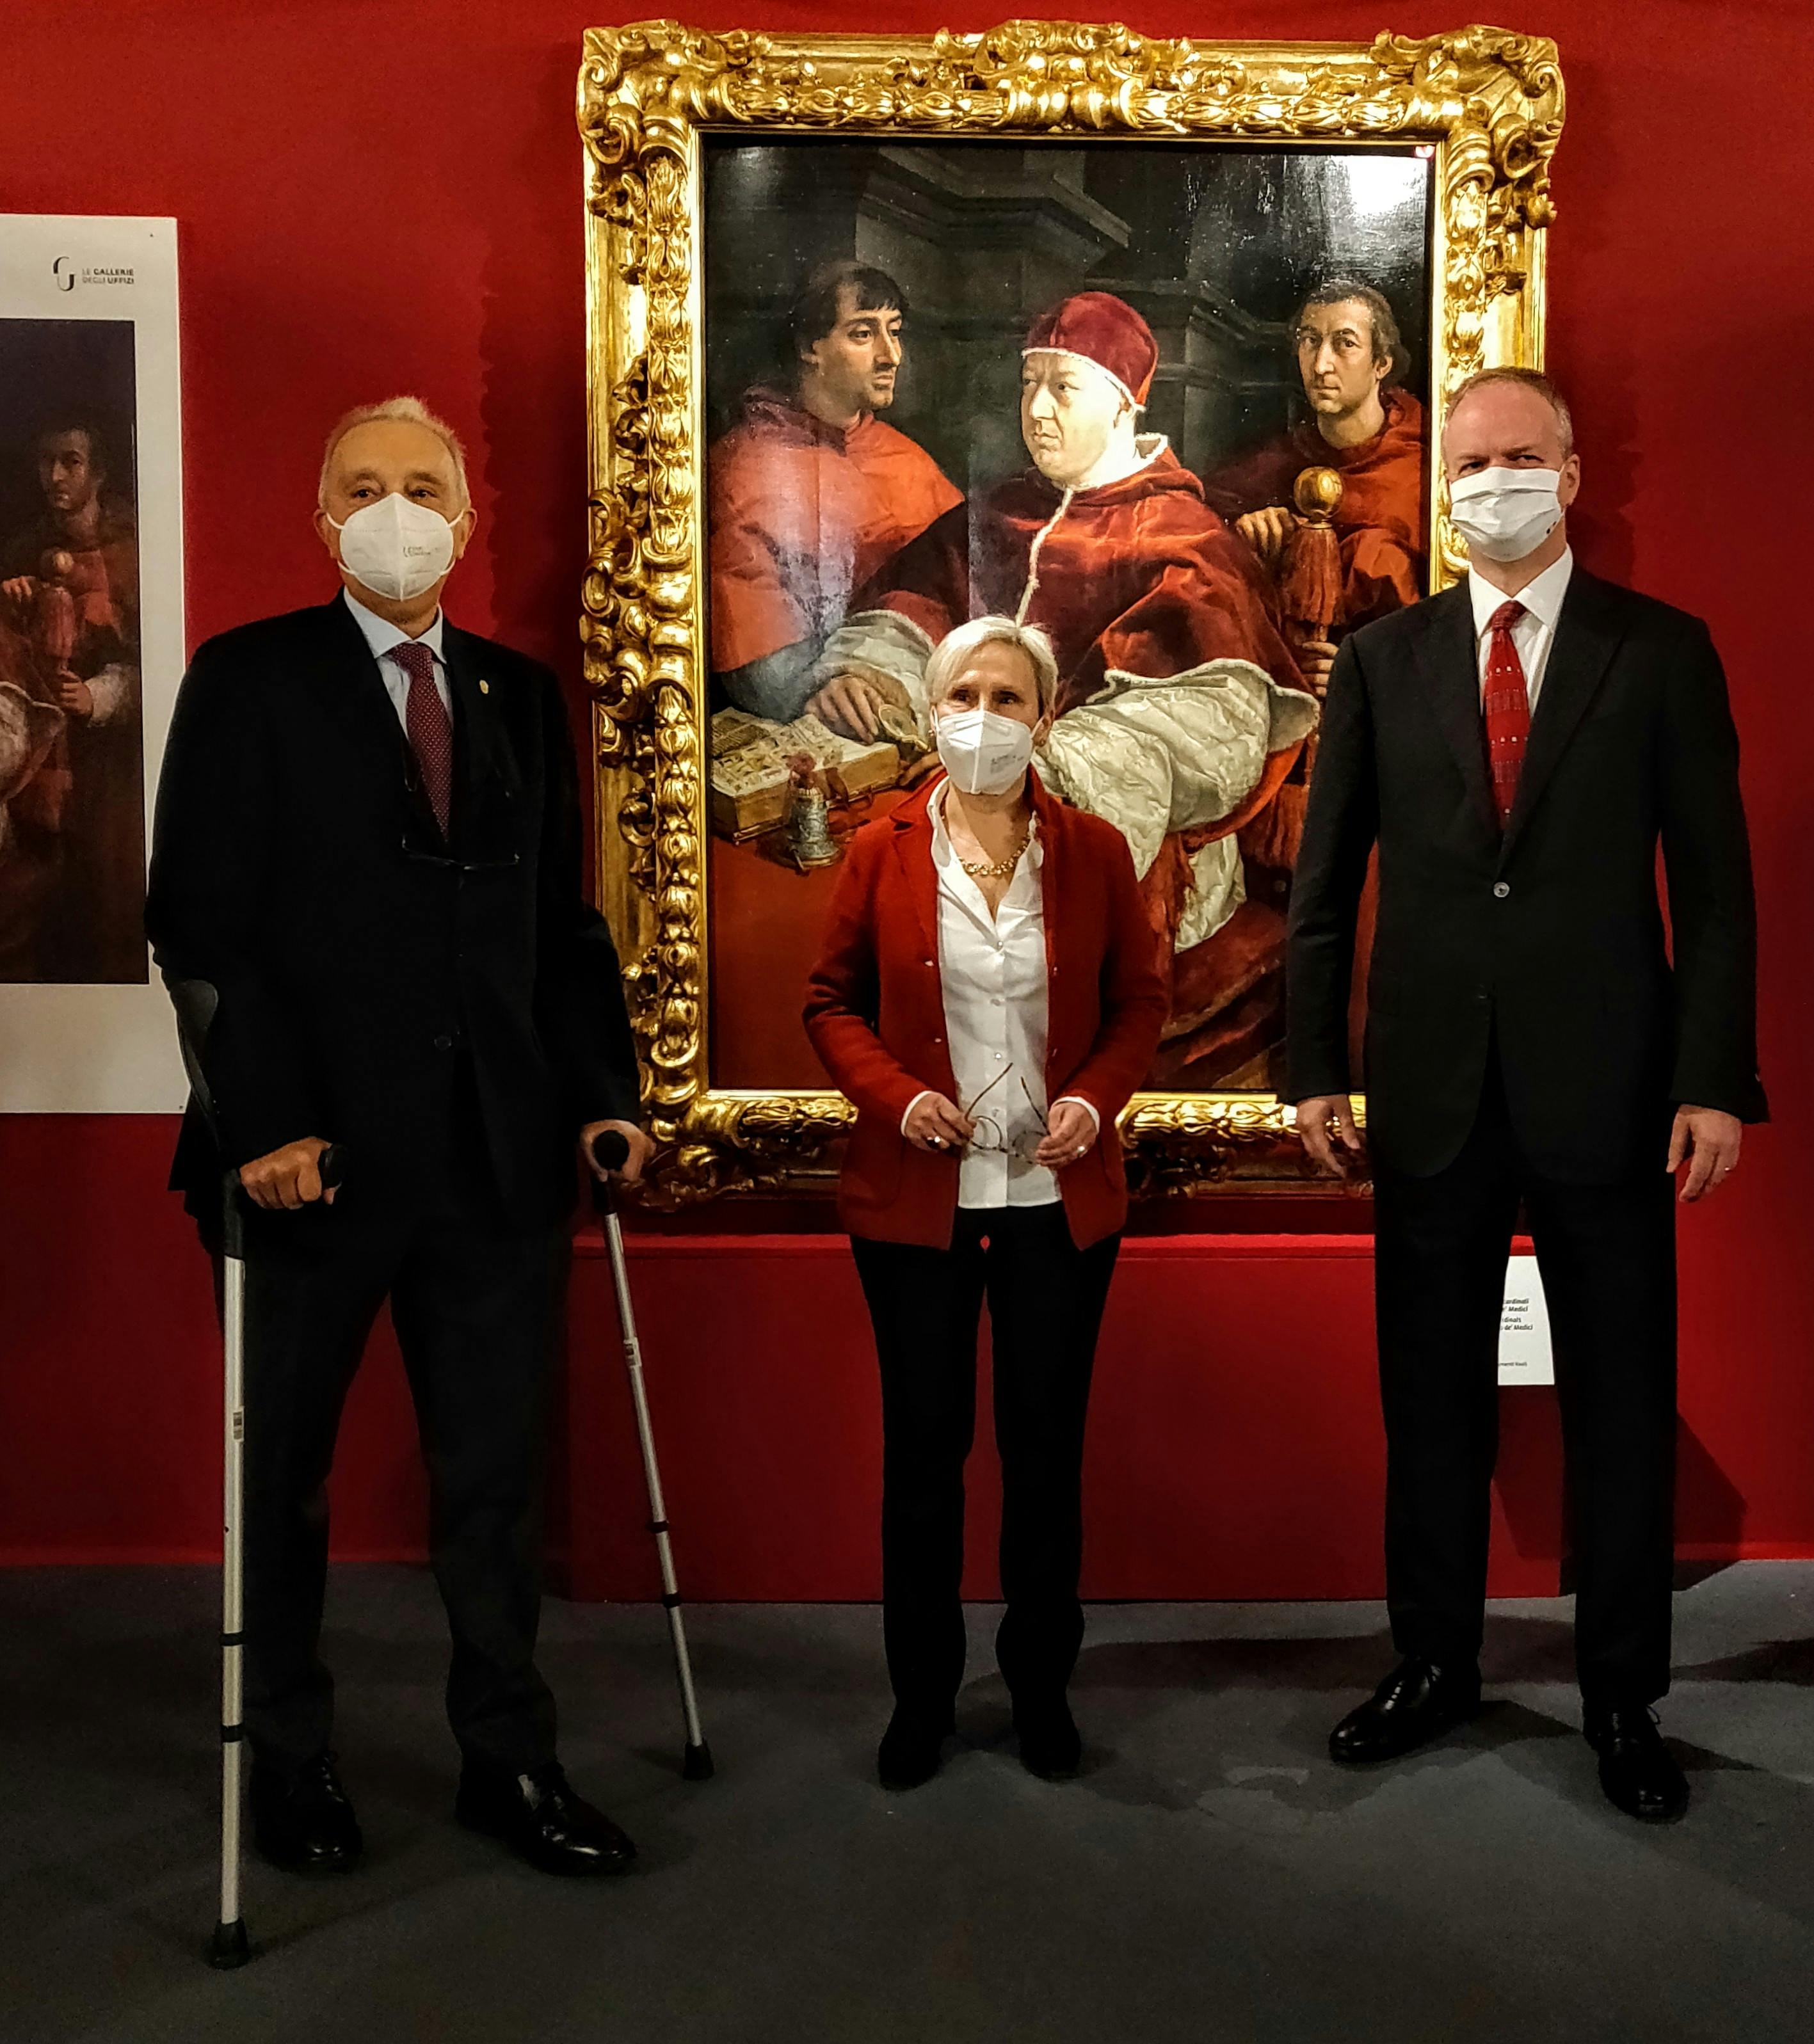 The Medici Pope returns to Florence